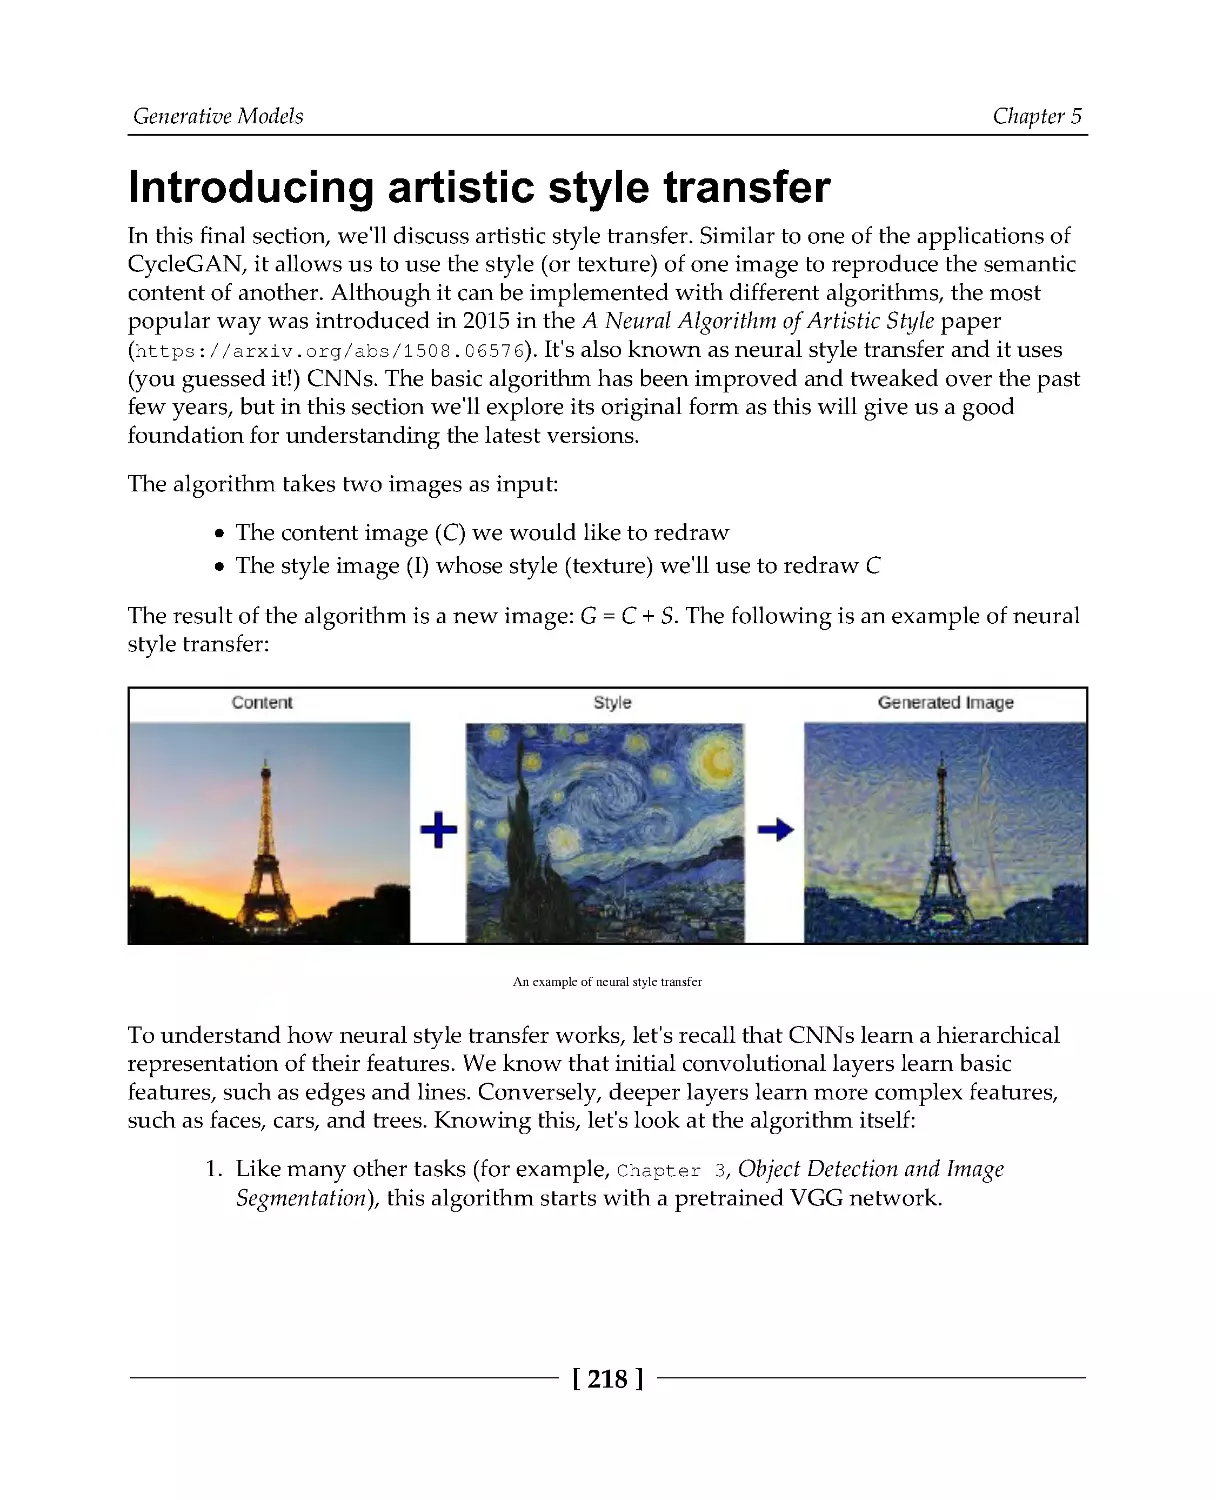 Introducing artistic style transfer